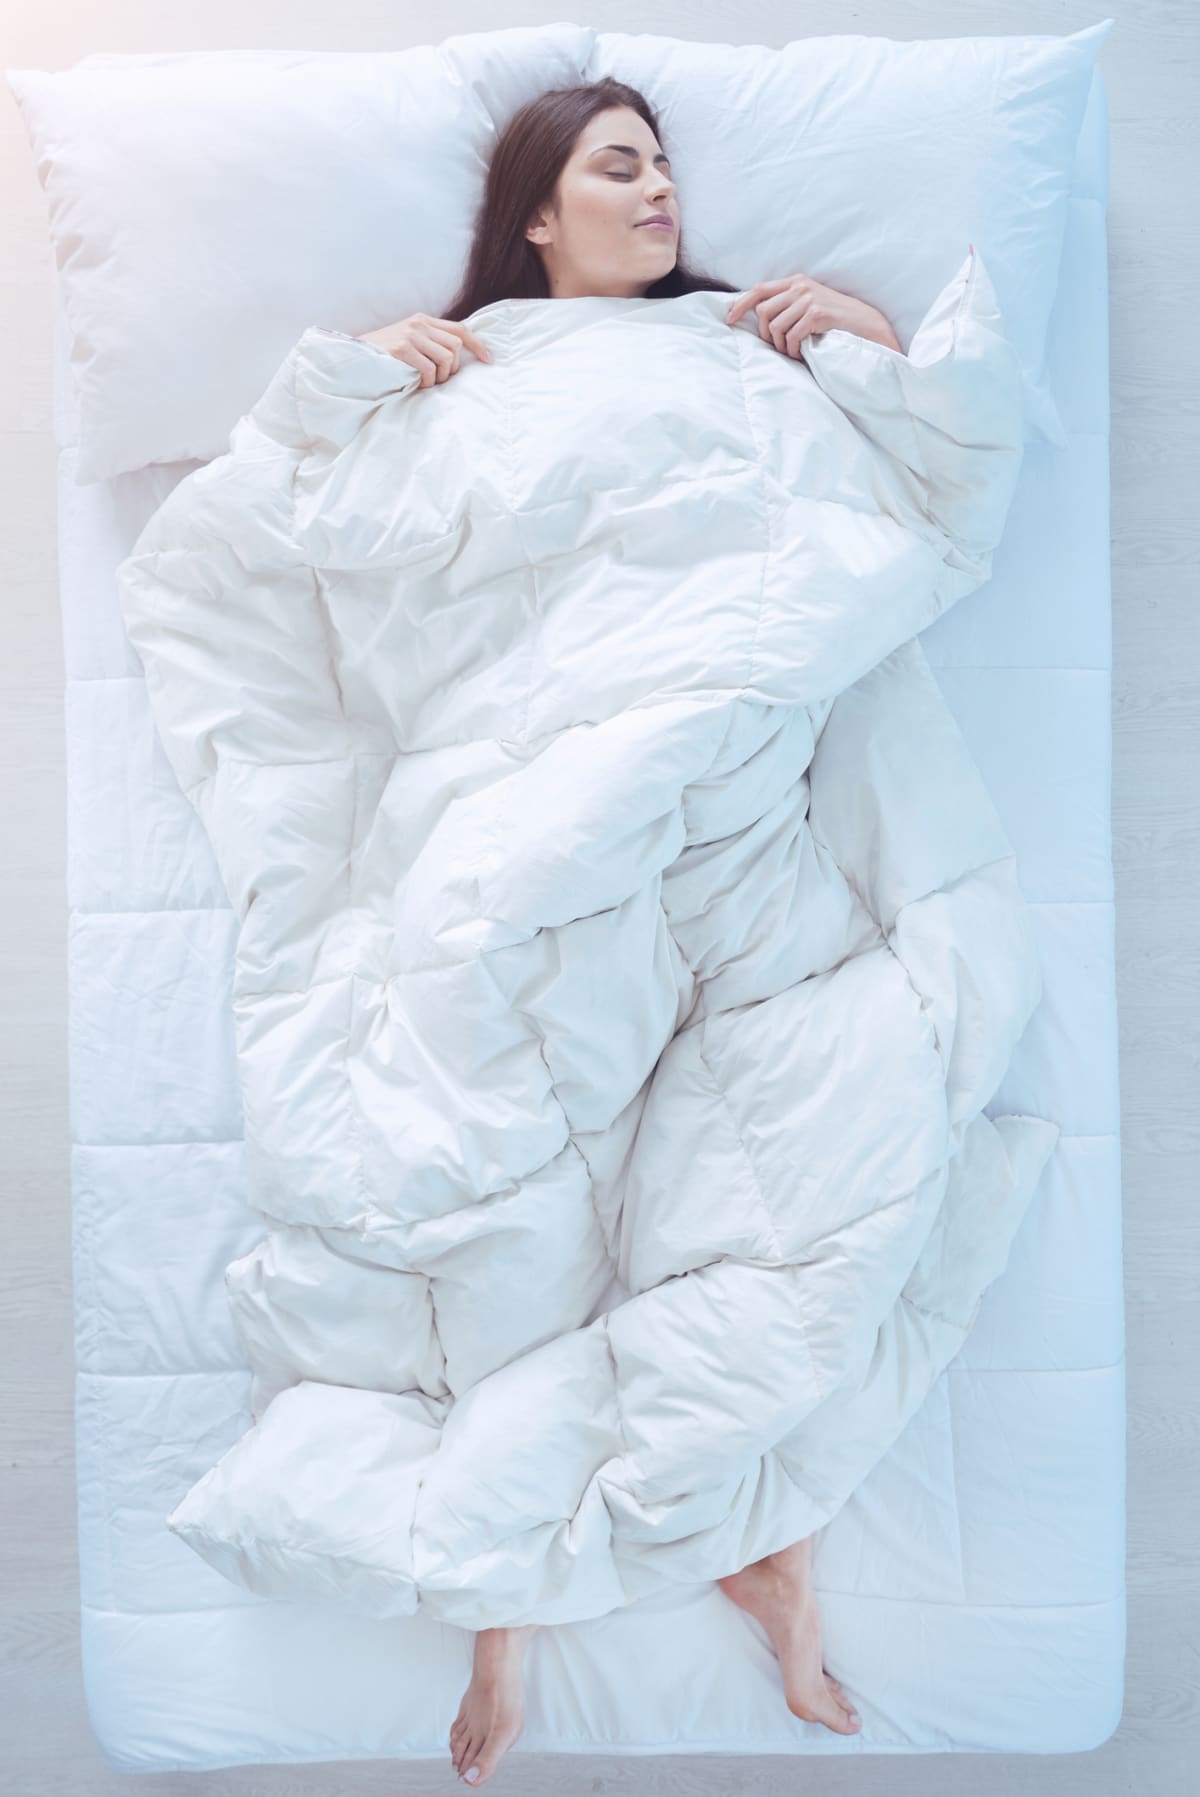 A woman sleeping peacefully while covered in a duvet